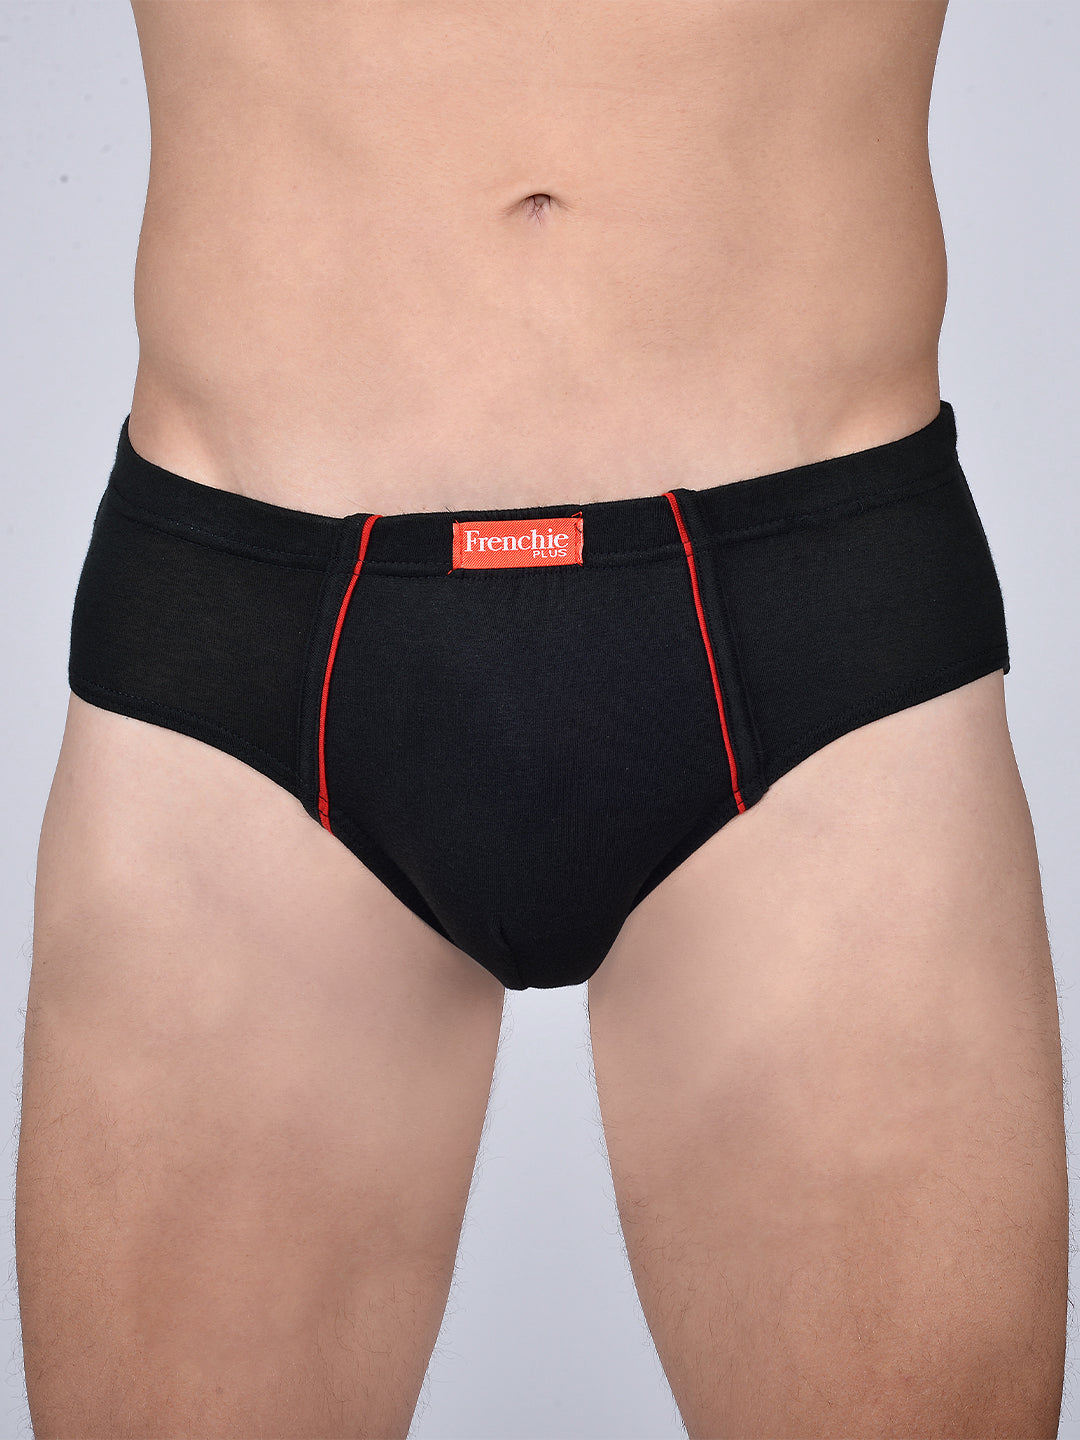 Buy Men's VIP Frenchie Underwear Plus Online in India – VIP Clothing Limited